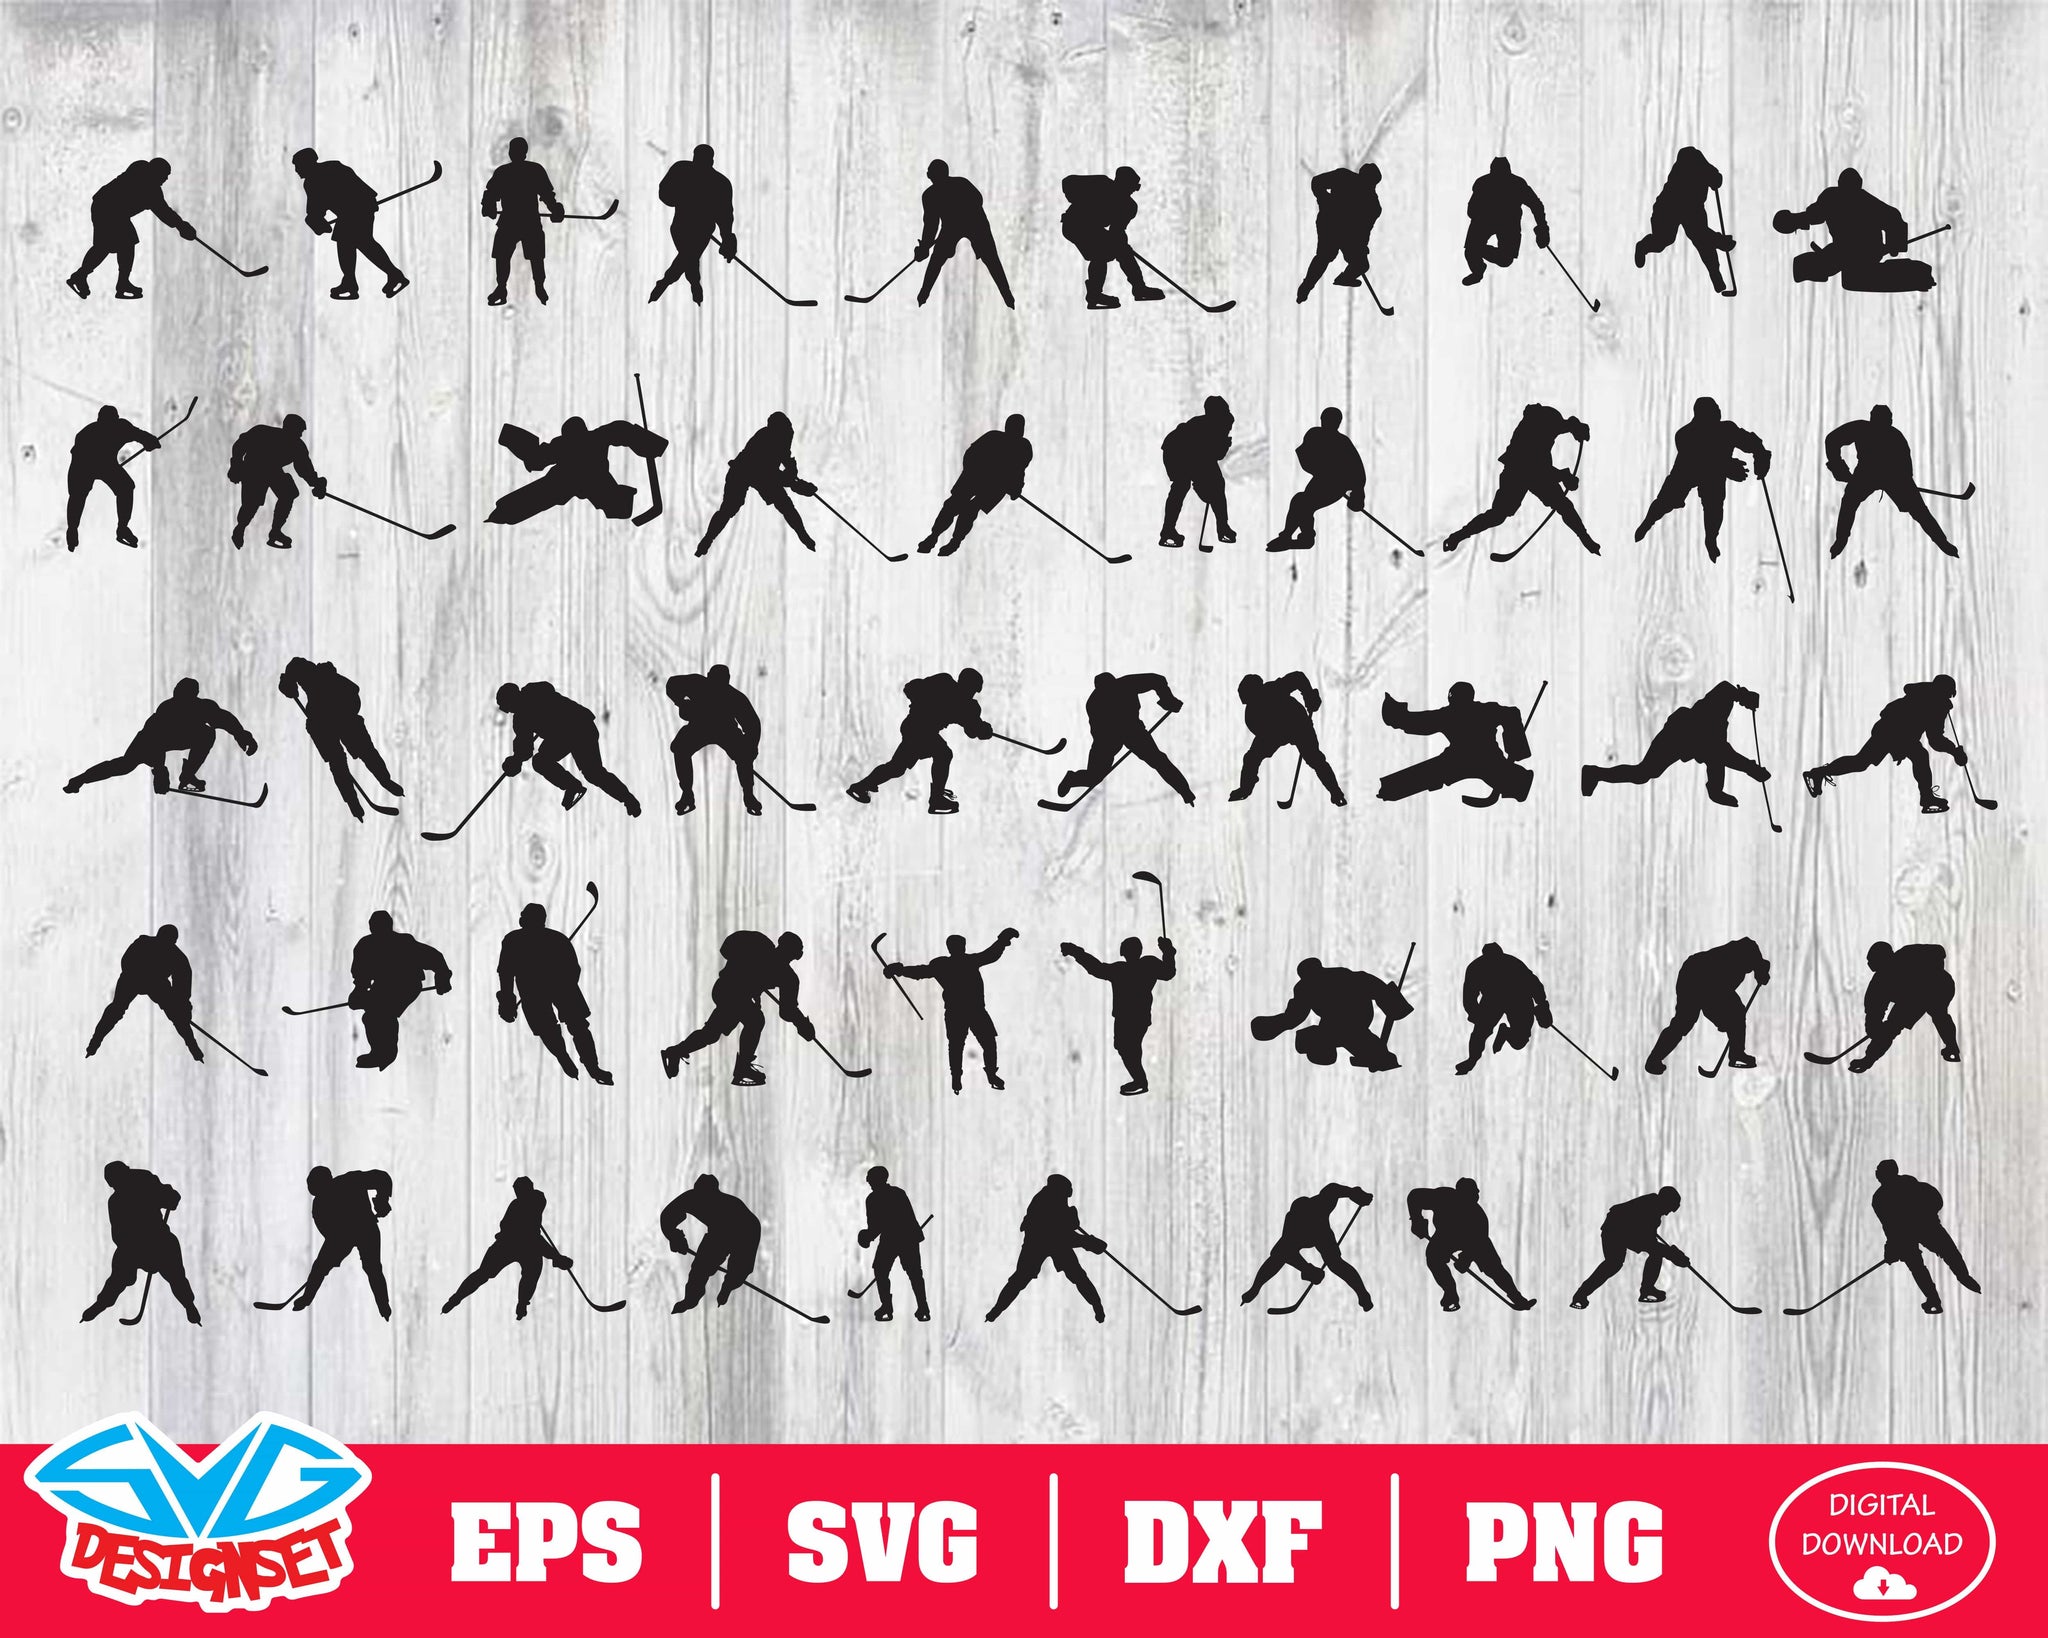 Hockey Svg, Dxf, Eps, Png, Clipart, Silhouette and Cutfiles - SVGDesignSets